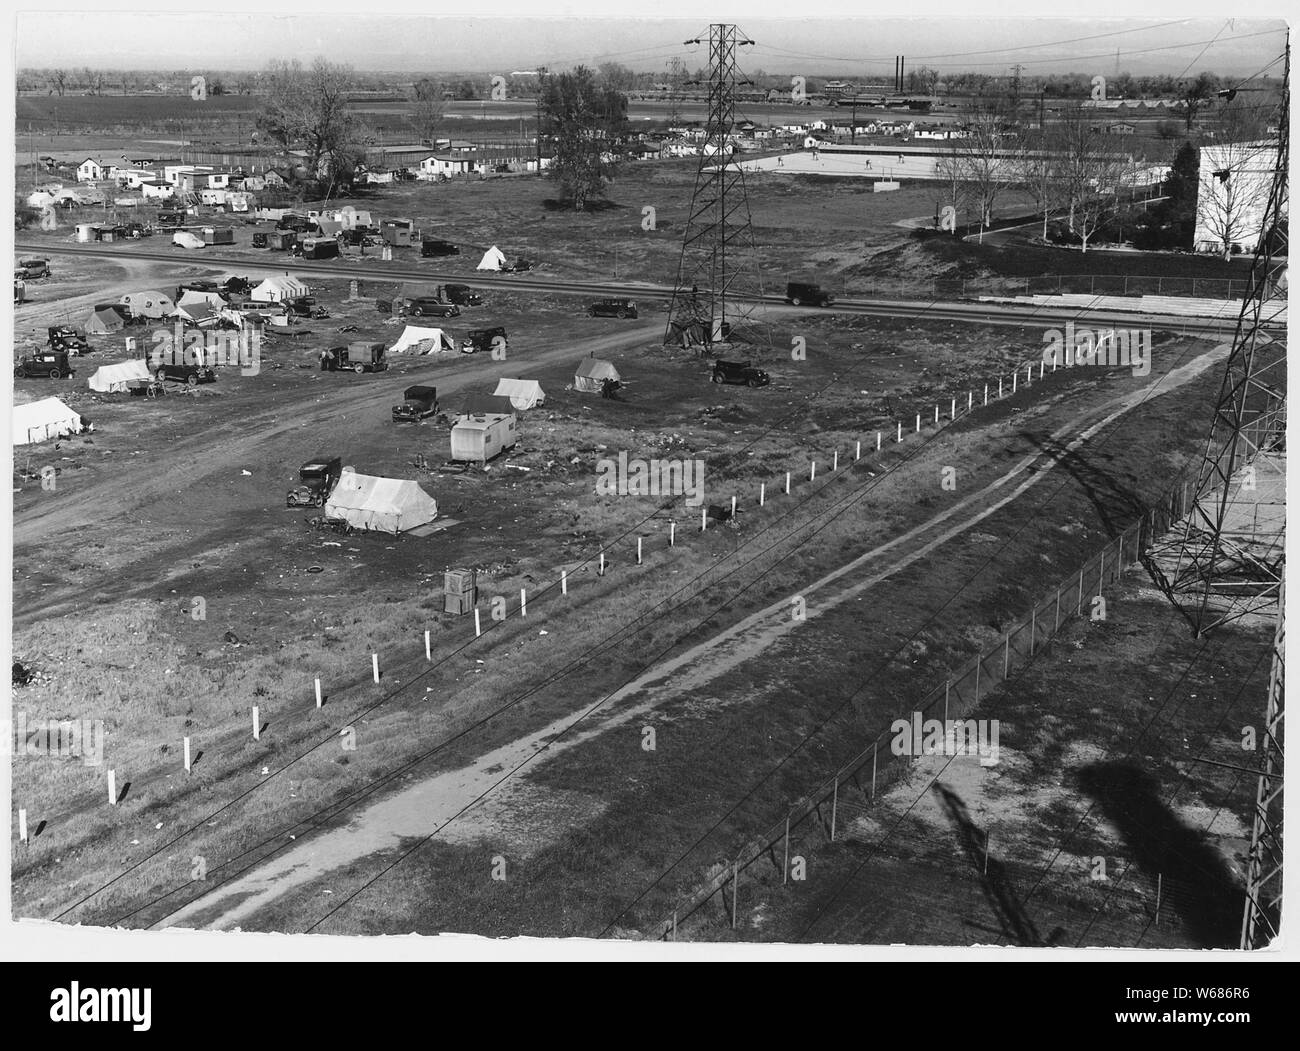 Sacramento, California. Squatter camp of agricultural labor migrants one-eighth mile outside limits . . .; Scope and content:  Full caption reads as follows: Sacramento, California. Squatter camp of agricultural labor migrants one-eighth mile outside limits of state capital of California. Above 125 units, without sanitation; water donated by power company from single faucet. Across the main road (upper right of panel) is a trailer camp. Beyond is newly developing shacktown community where lots are being sold and families are settling in makeshift homebuilt cabins and cottages of all descriptio Stock Photo